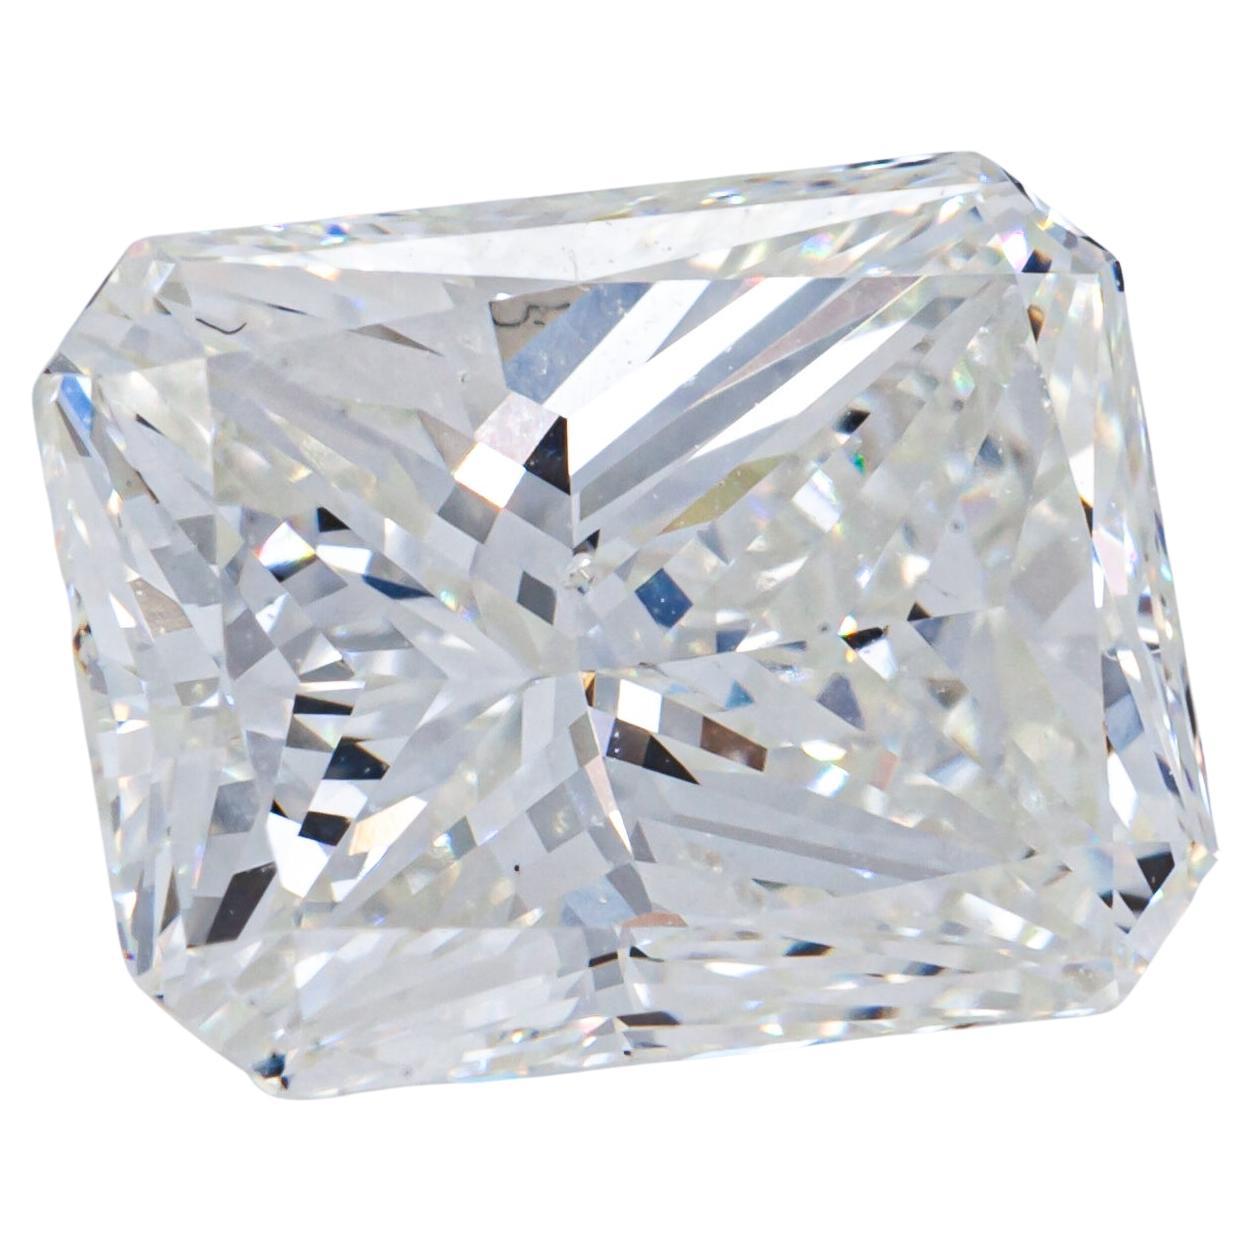 2.07 Carat Loose H /SI1 Radiant Cut Diamond GIA Certified For Sale